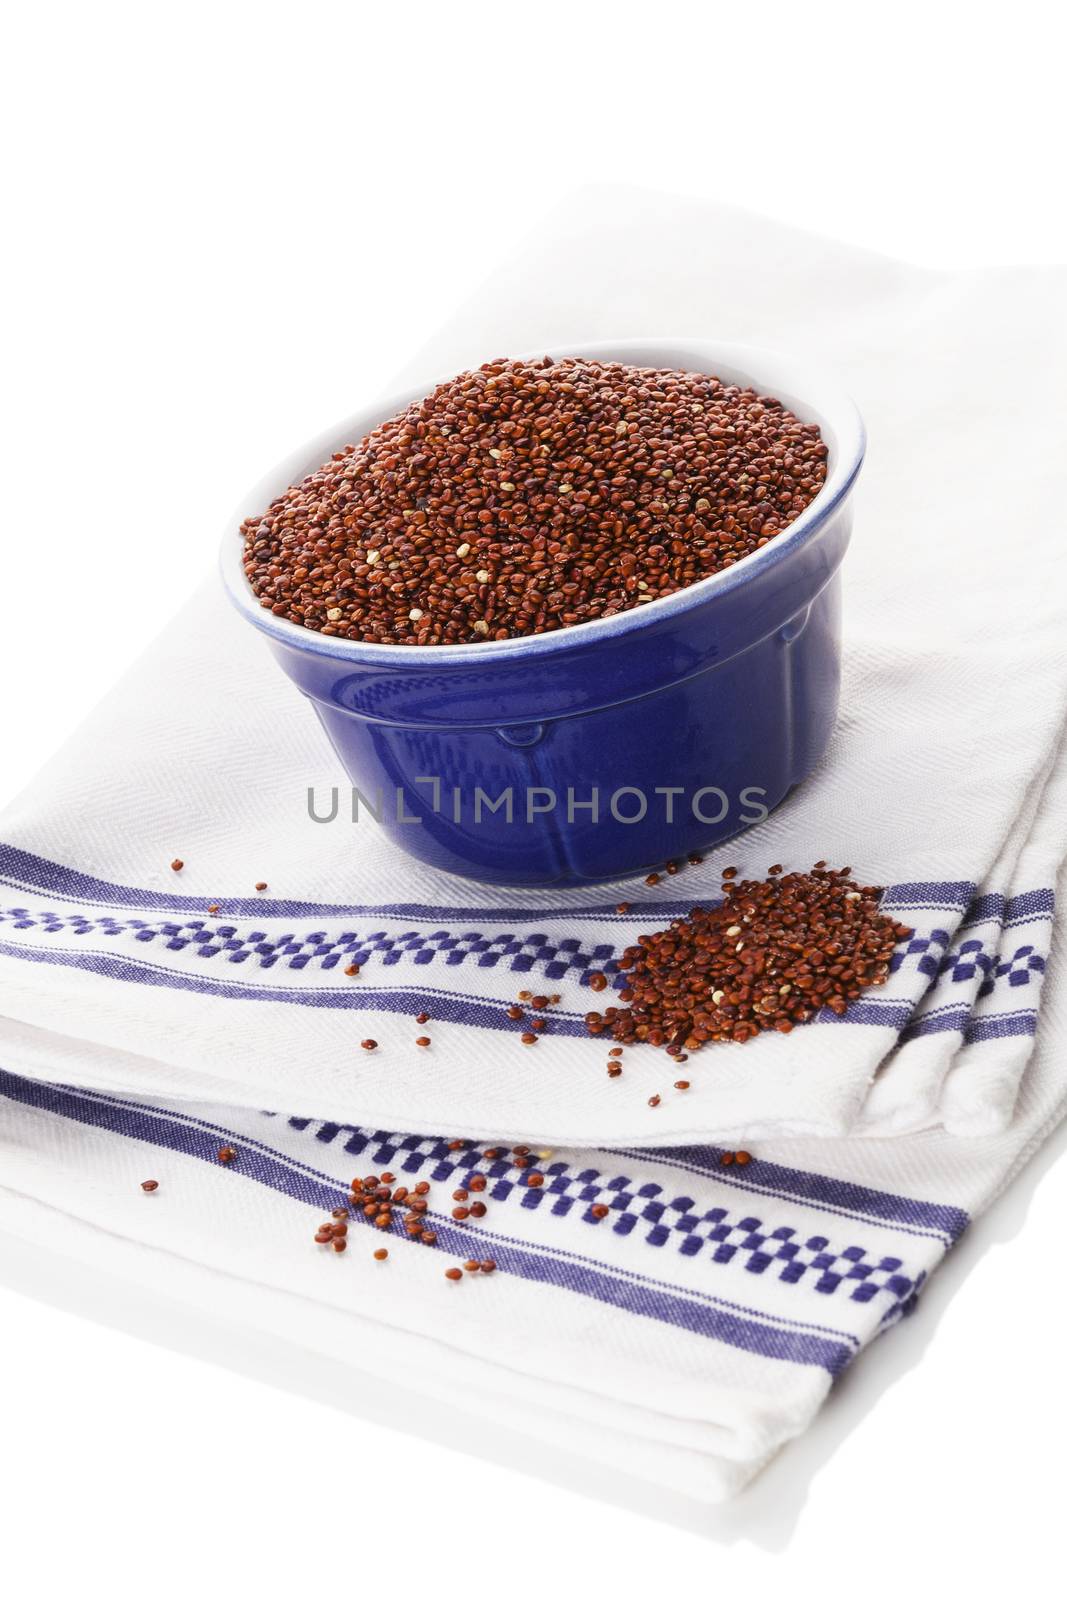 Red quinoa seeds in bowl isolated on white background. Healthy eating.